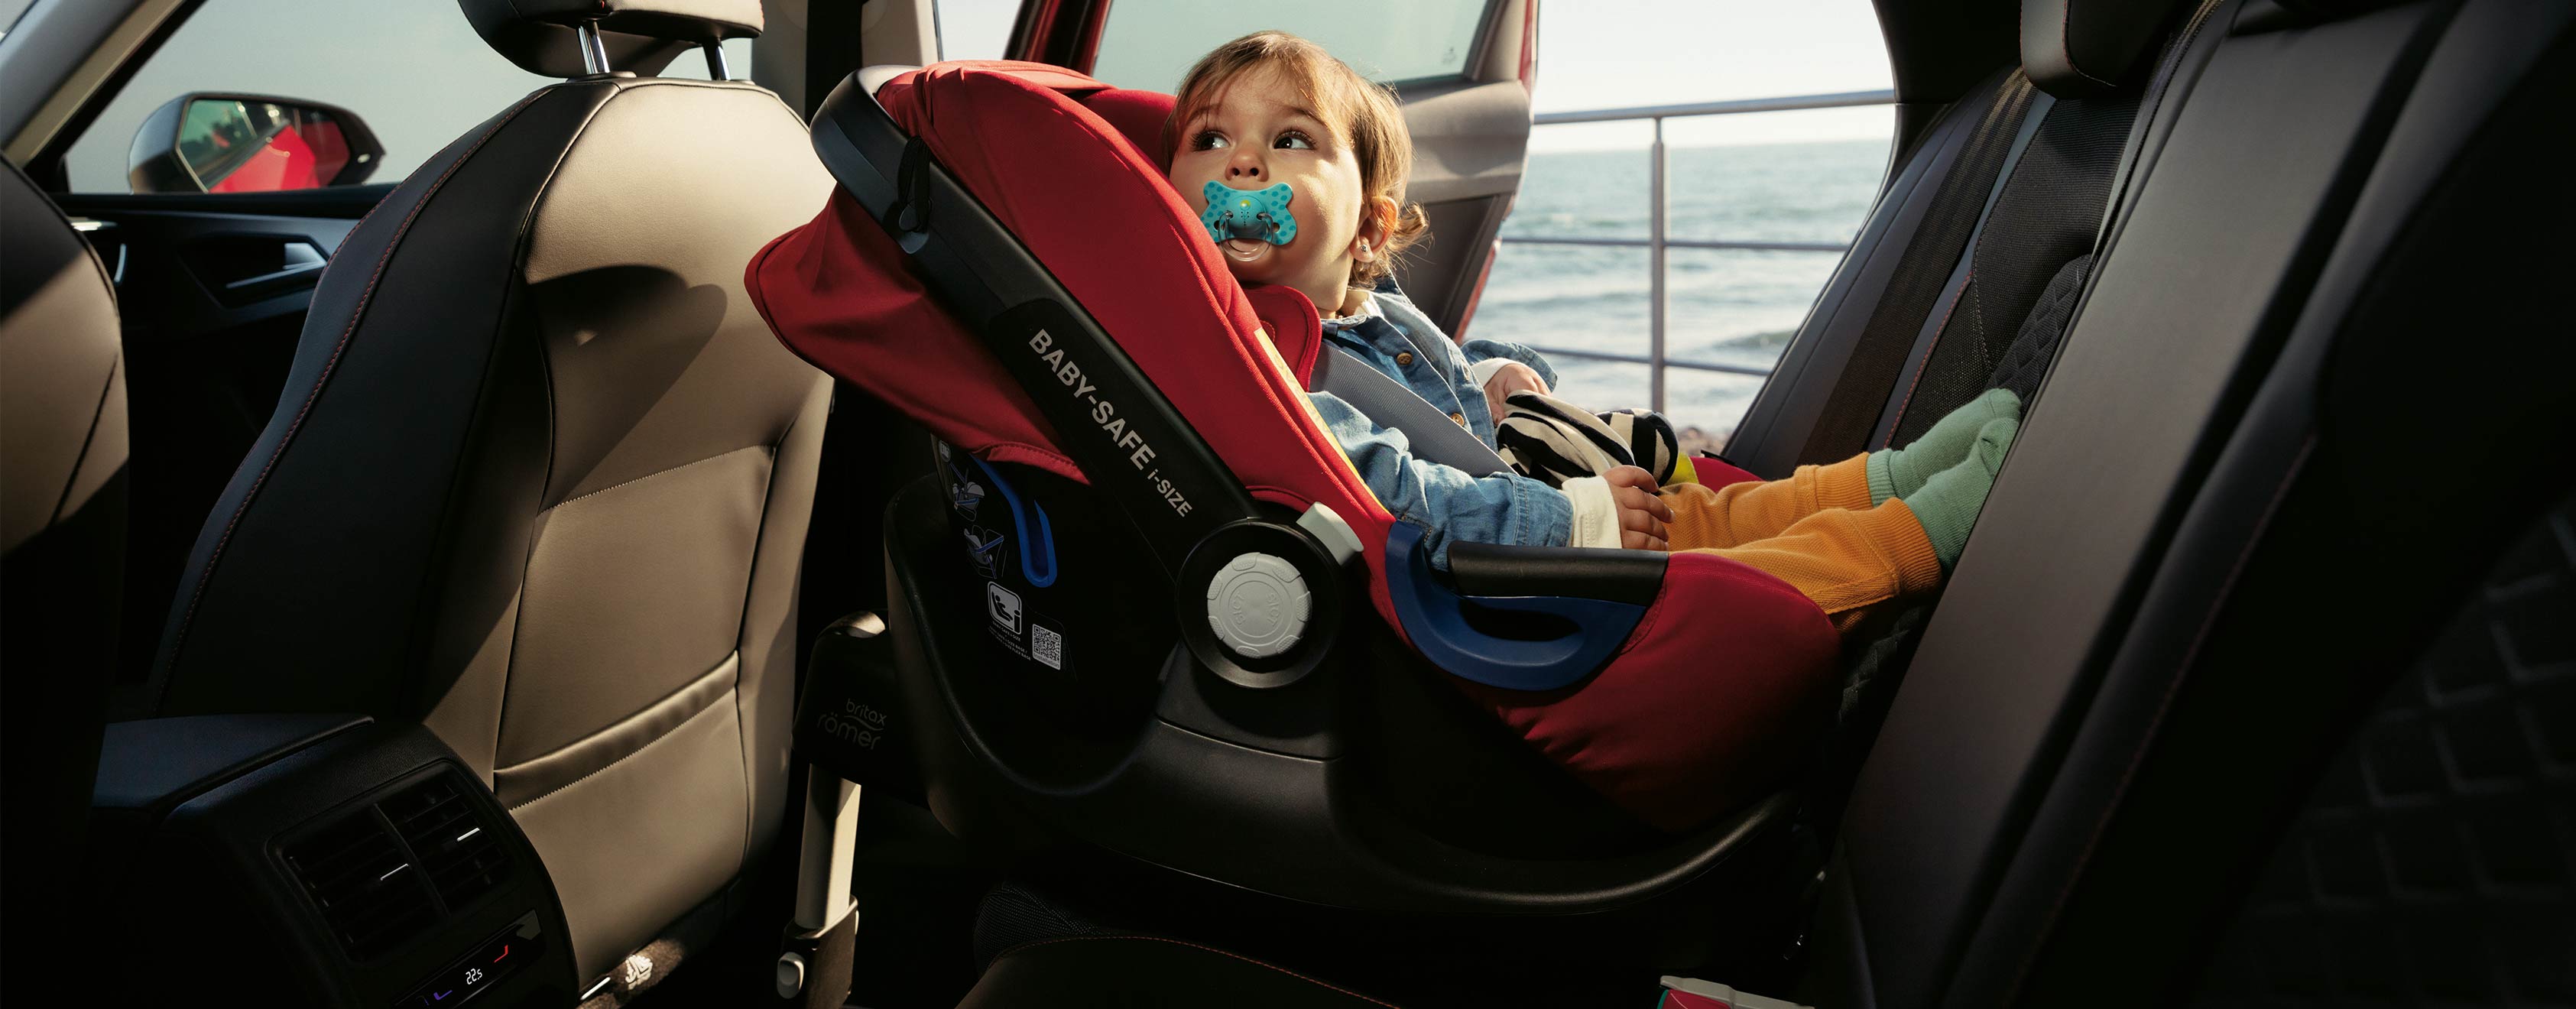 SEAT new car services and maintenance – laughing smiling child in the child seat of a SEAT new car